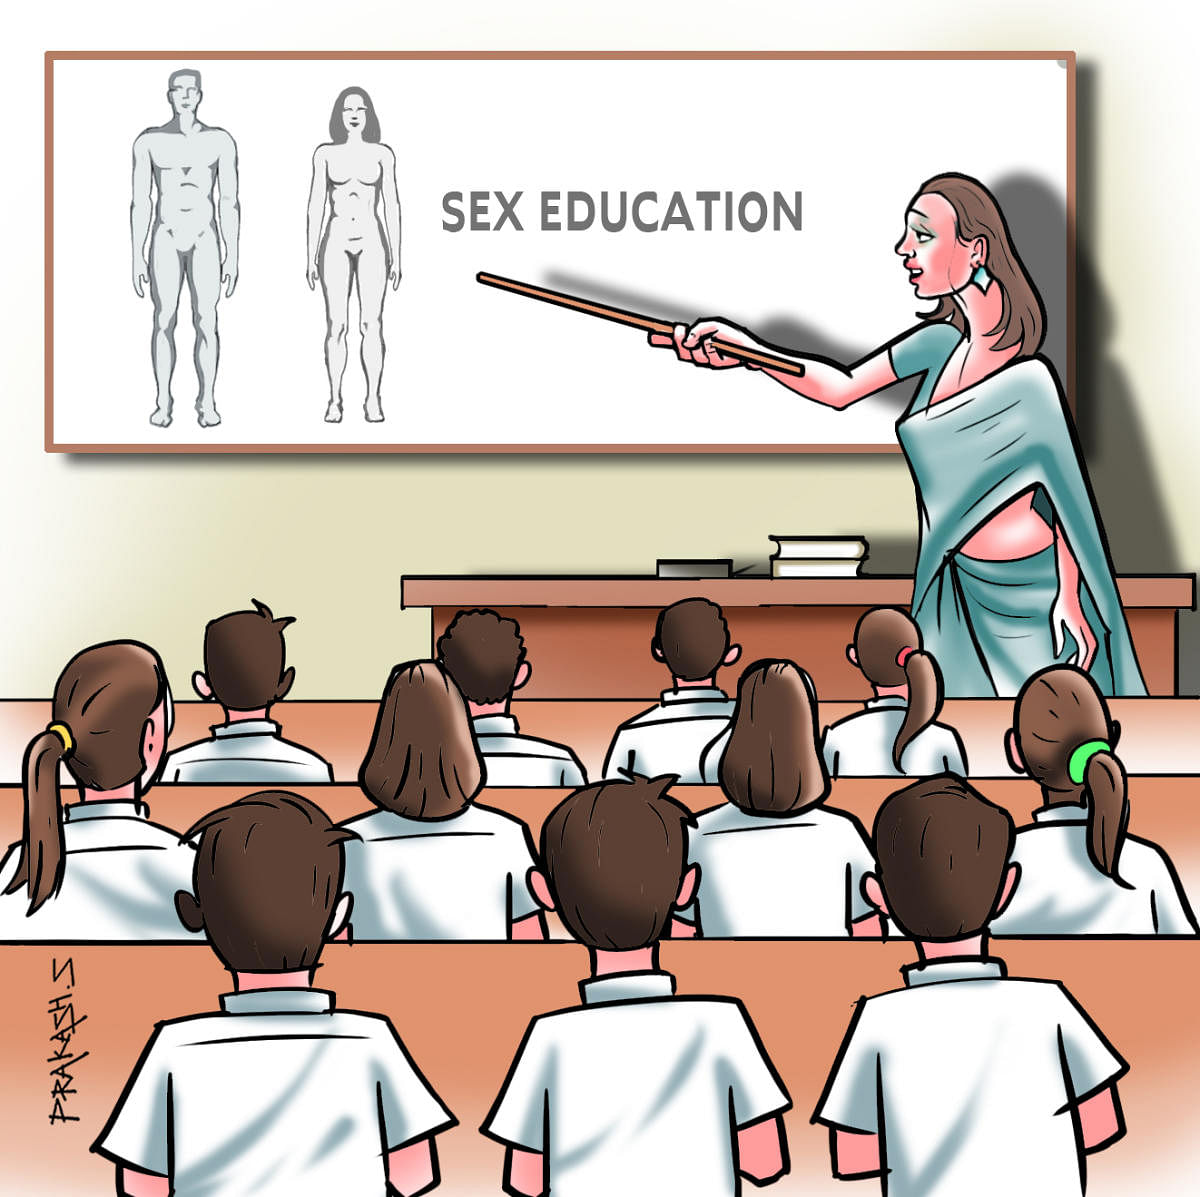 Experts say that comprehensive sexuality education is required to combat issues such as slut shaming and sexualition of acts like breastfeeding.